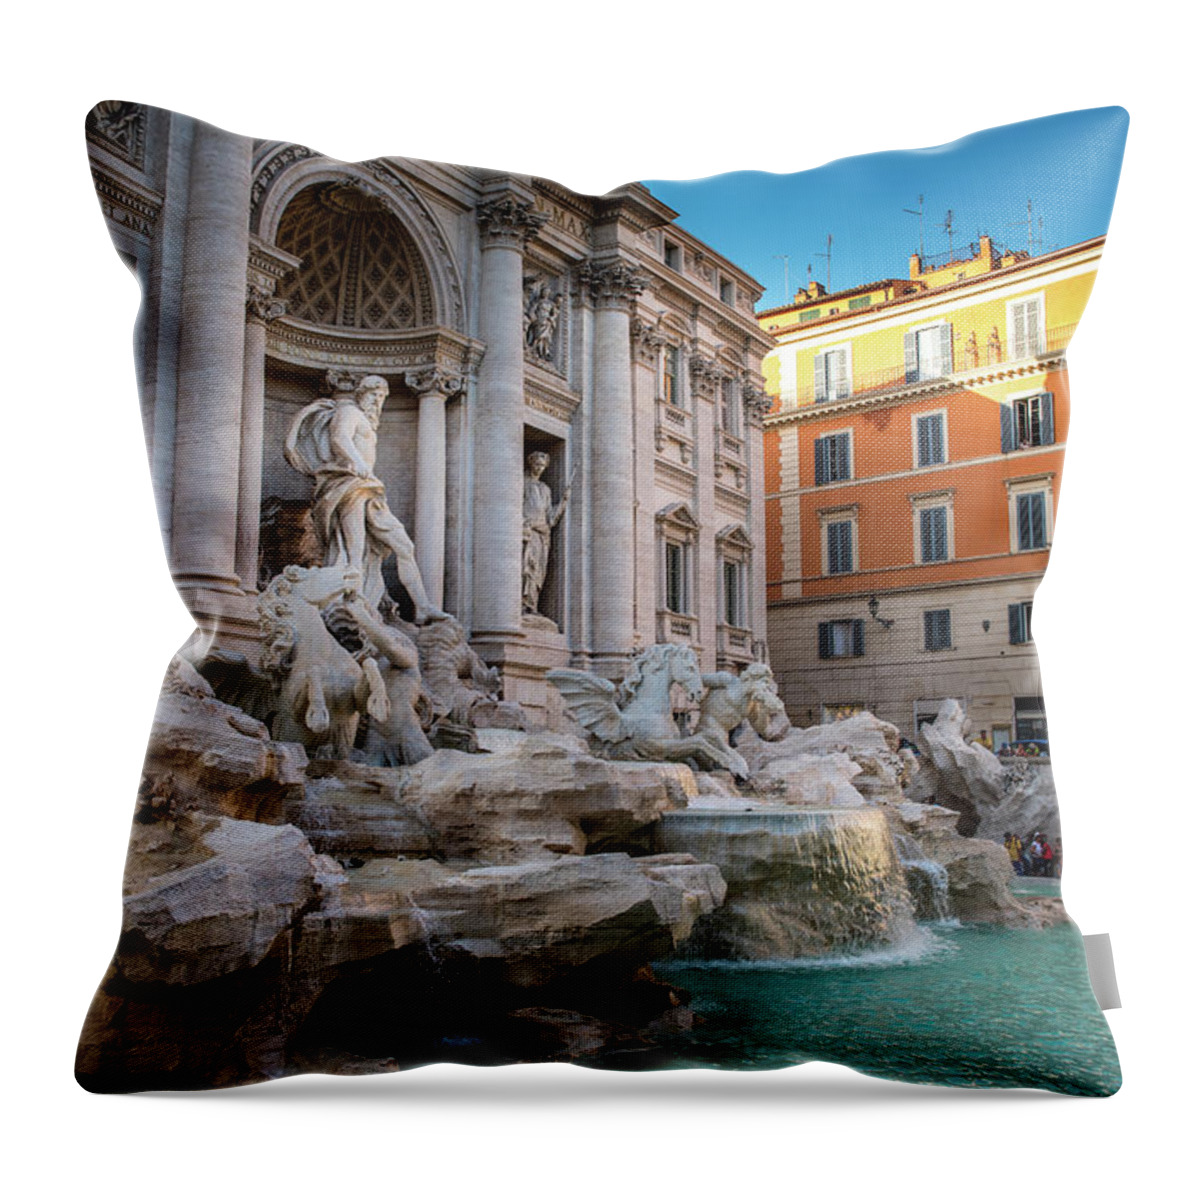 Trevi Fountain Throw Pillow featuring the photograph Trevi Fountain by Fink Andreas